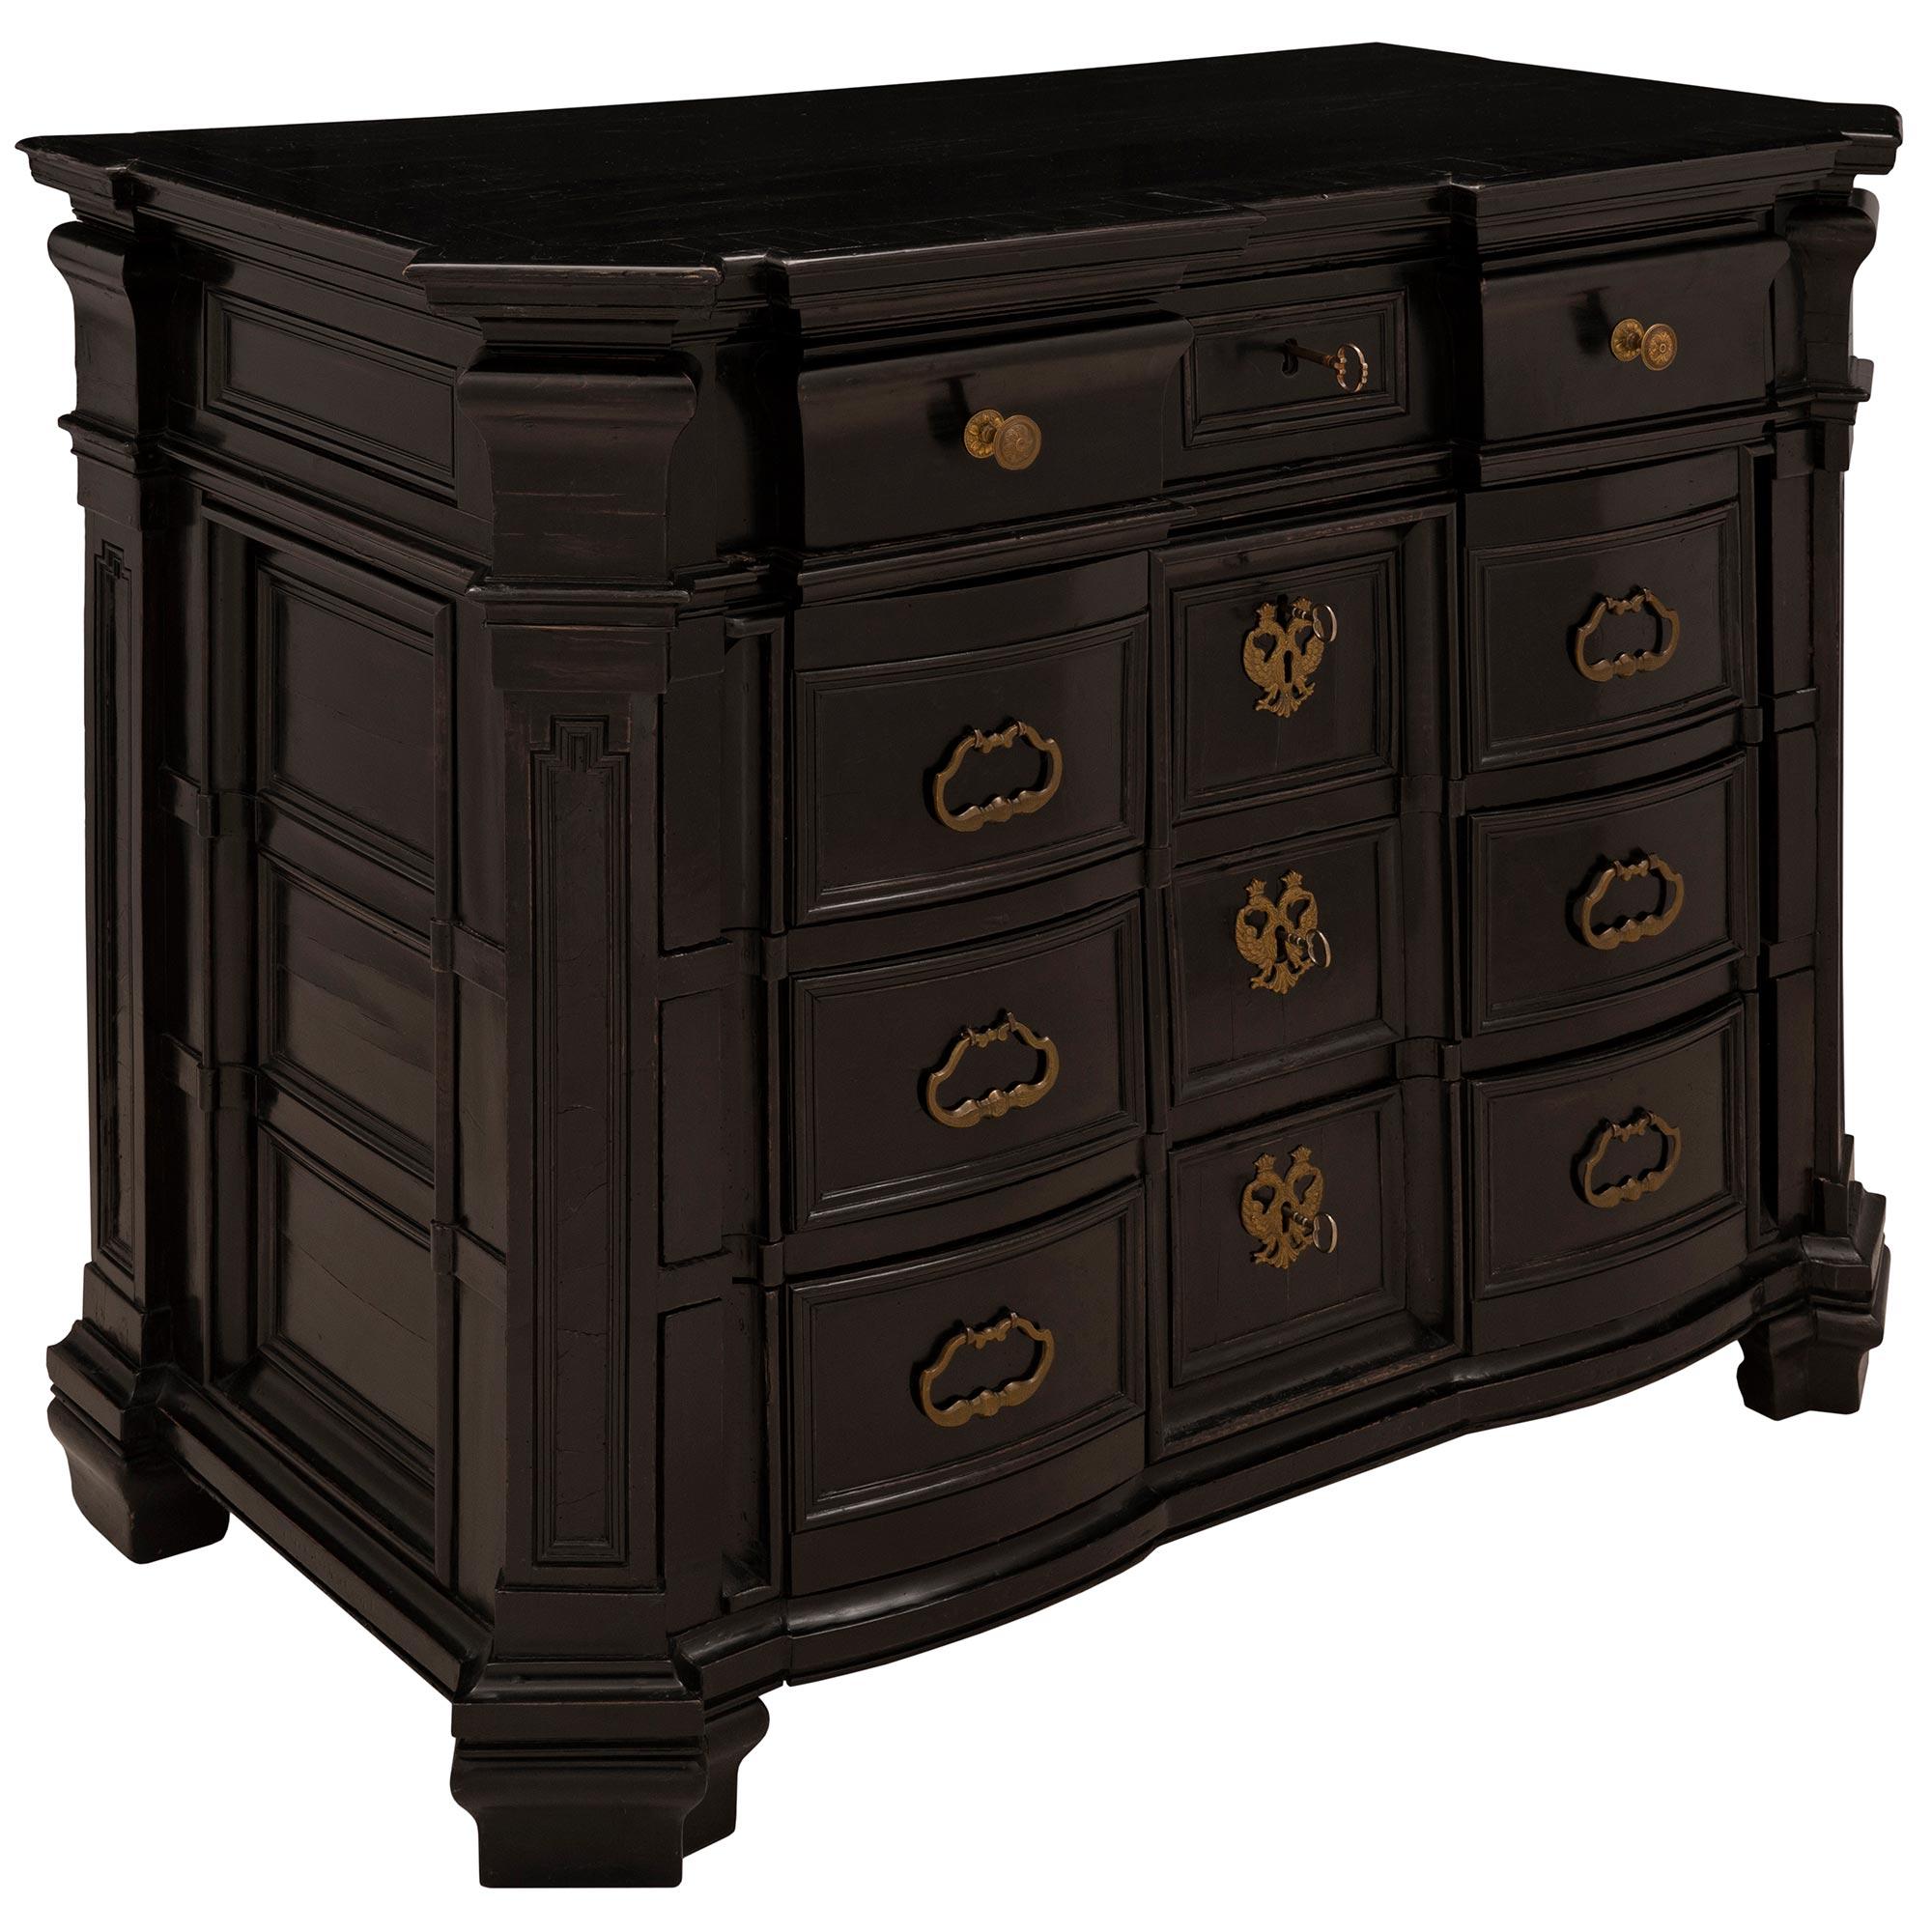 An exceptional and important 17th century, circa 1680, ebonized fruitwood commode from Milan, Italy. The commode with its unique linear and architectural lines throughout has an arbalette shaped front with cut-angle corners. The moulded border